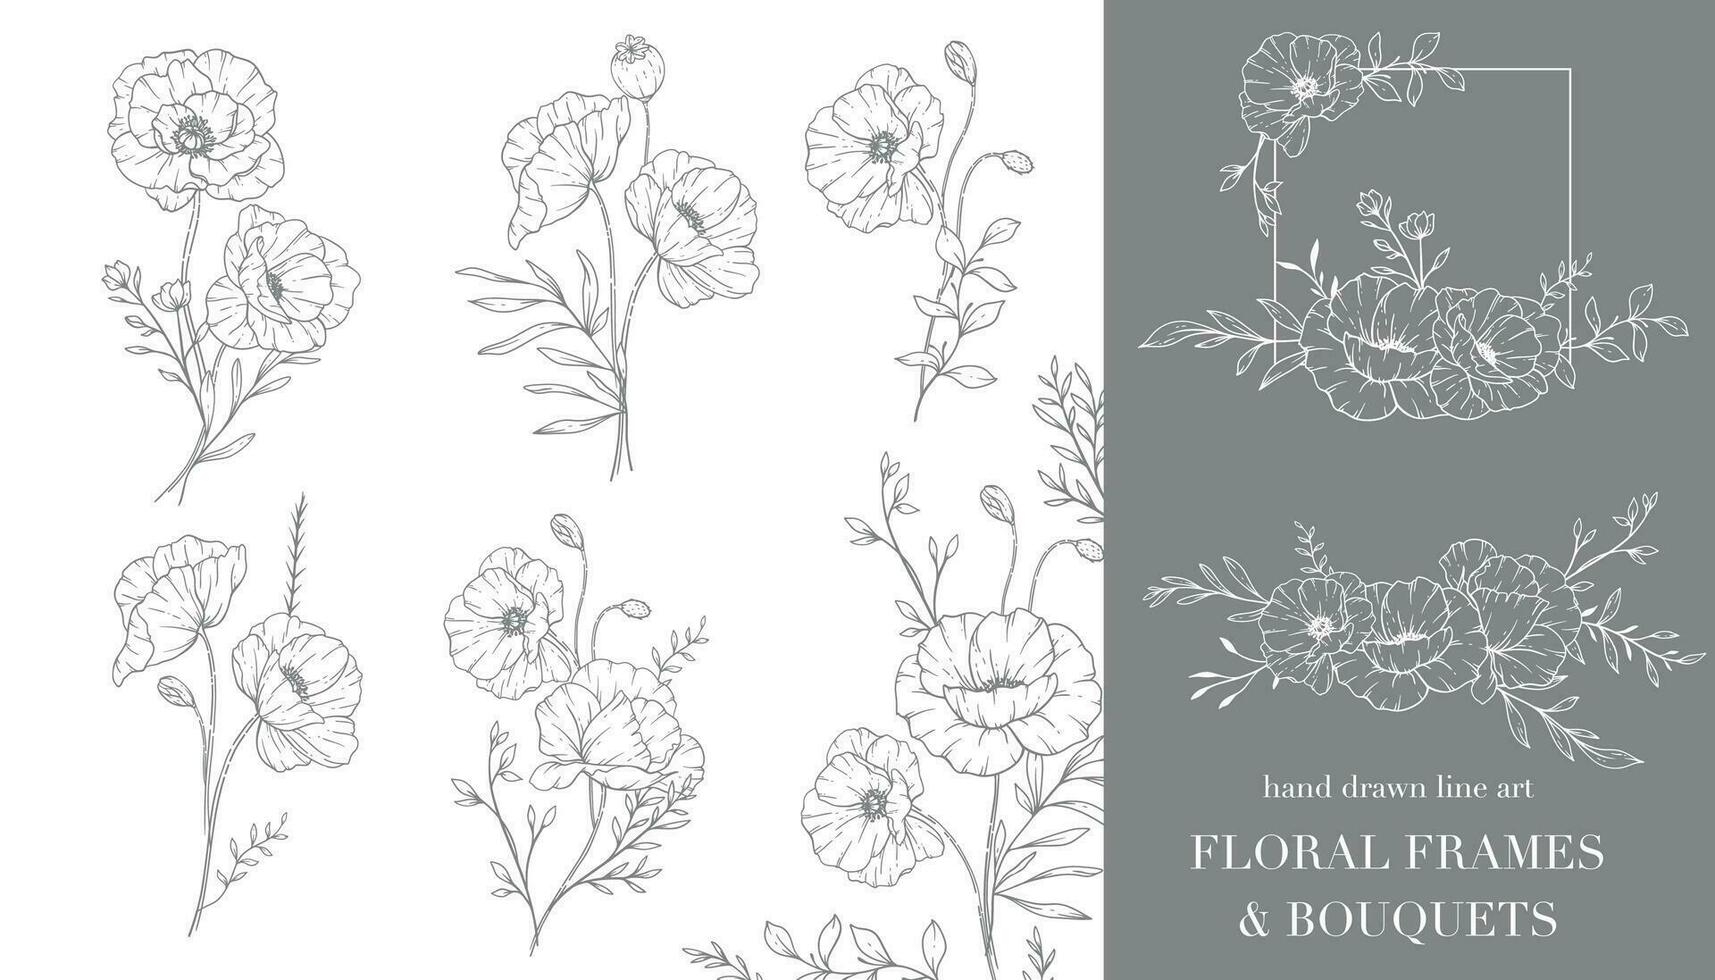 Poppy Flower Line Art. Floral Frames and Bouquets Line Art. Fine Line Poppies Frames Hand Drawn Illustration. Hand Draw Outline Wildflowers. Botanical Coloring Page. Poppy Isolated vector